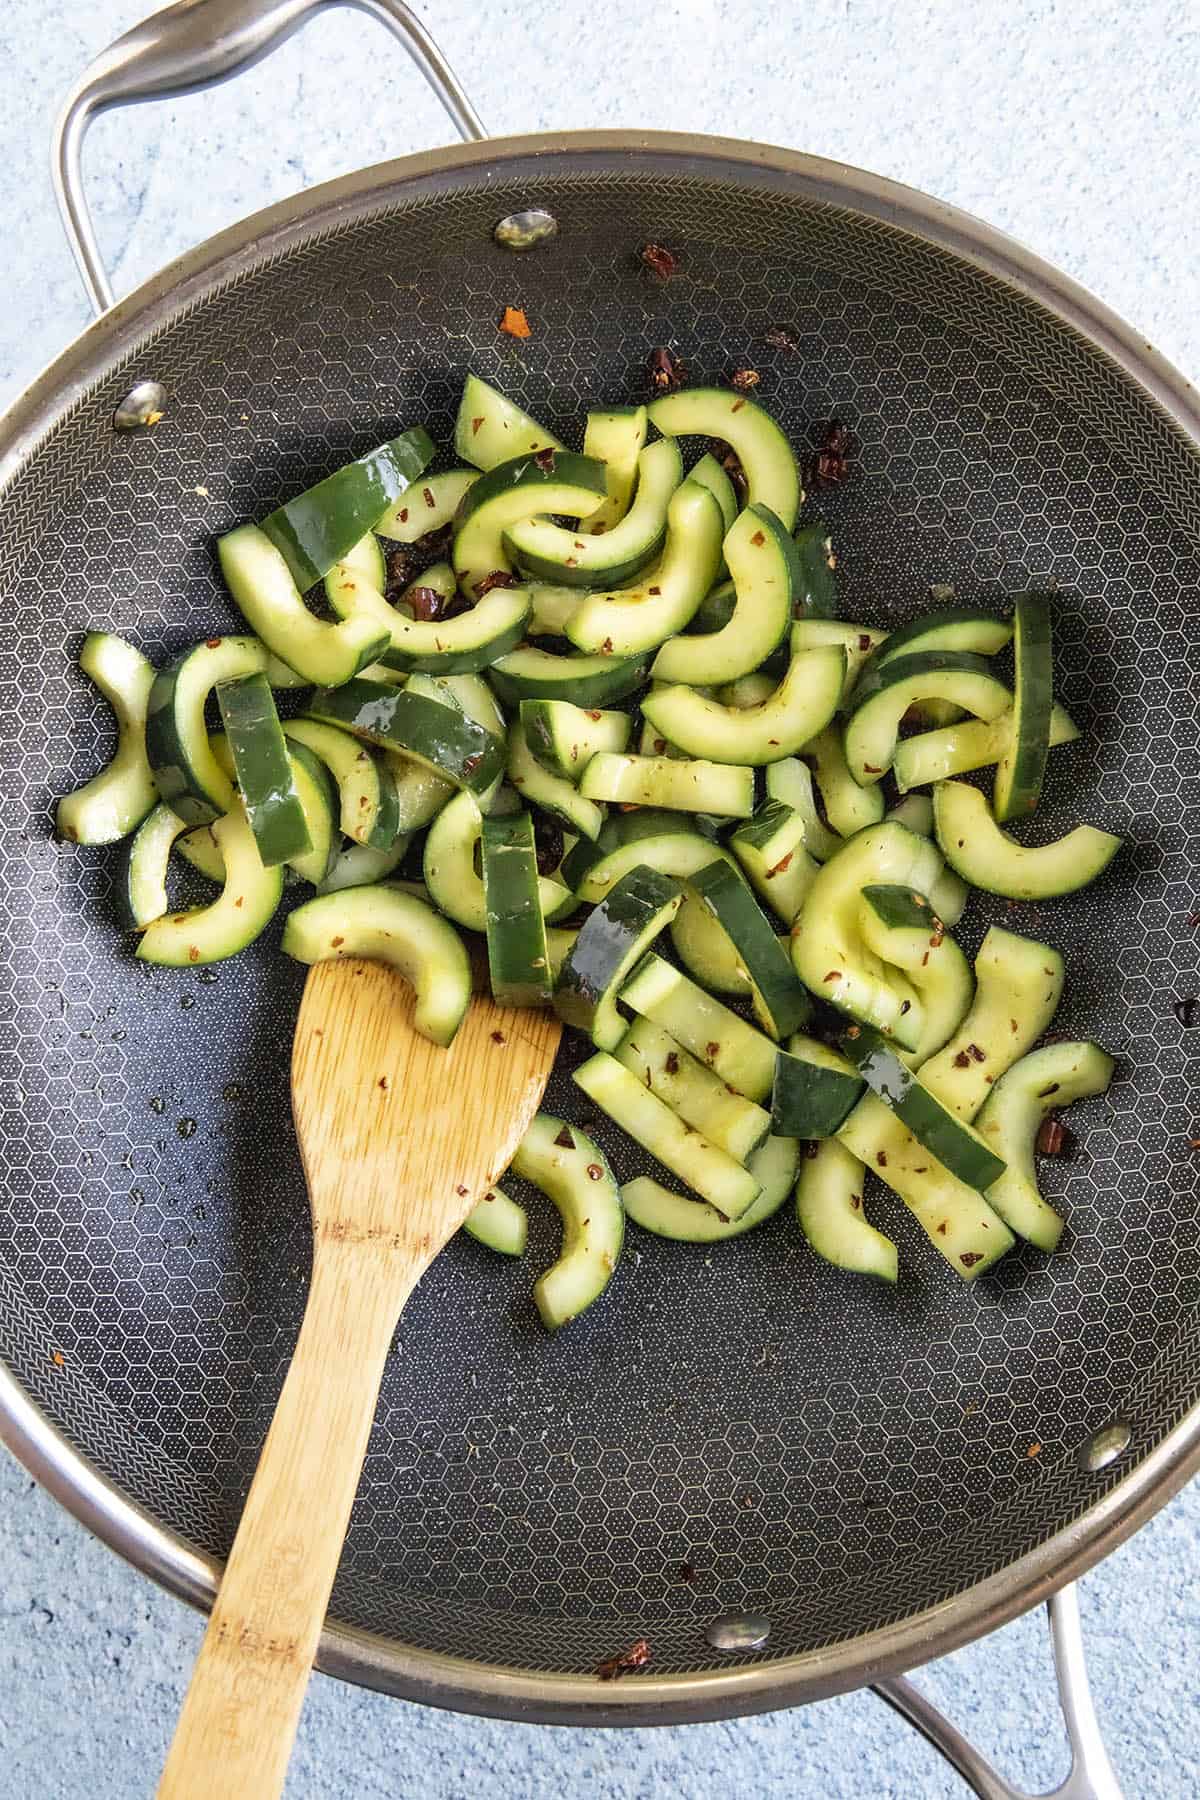 Quickly stir frying the cucumbers with Sichuan spices